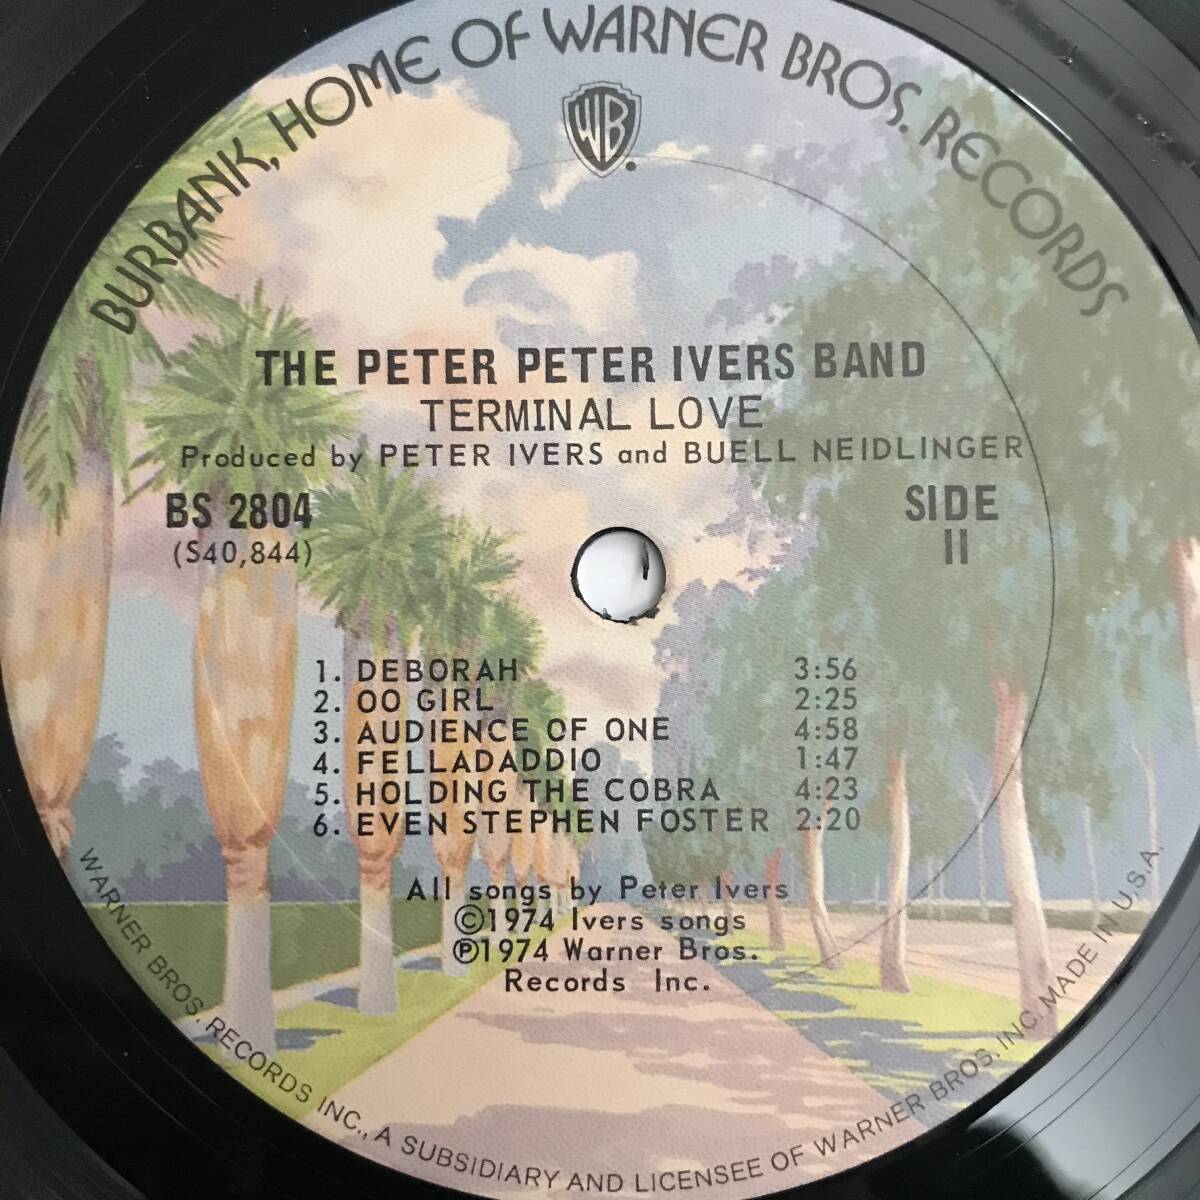 The Peter Peter Ivers Band - Terminal Love / アシッドフォーク サイケ 坂本慎太郎 ゆらゆら帝国 みのミュージック_画像6